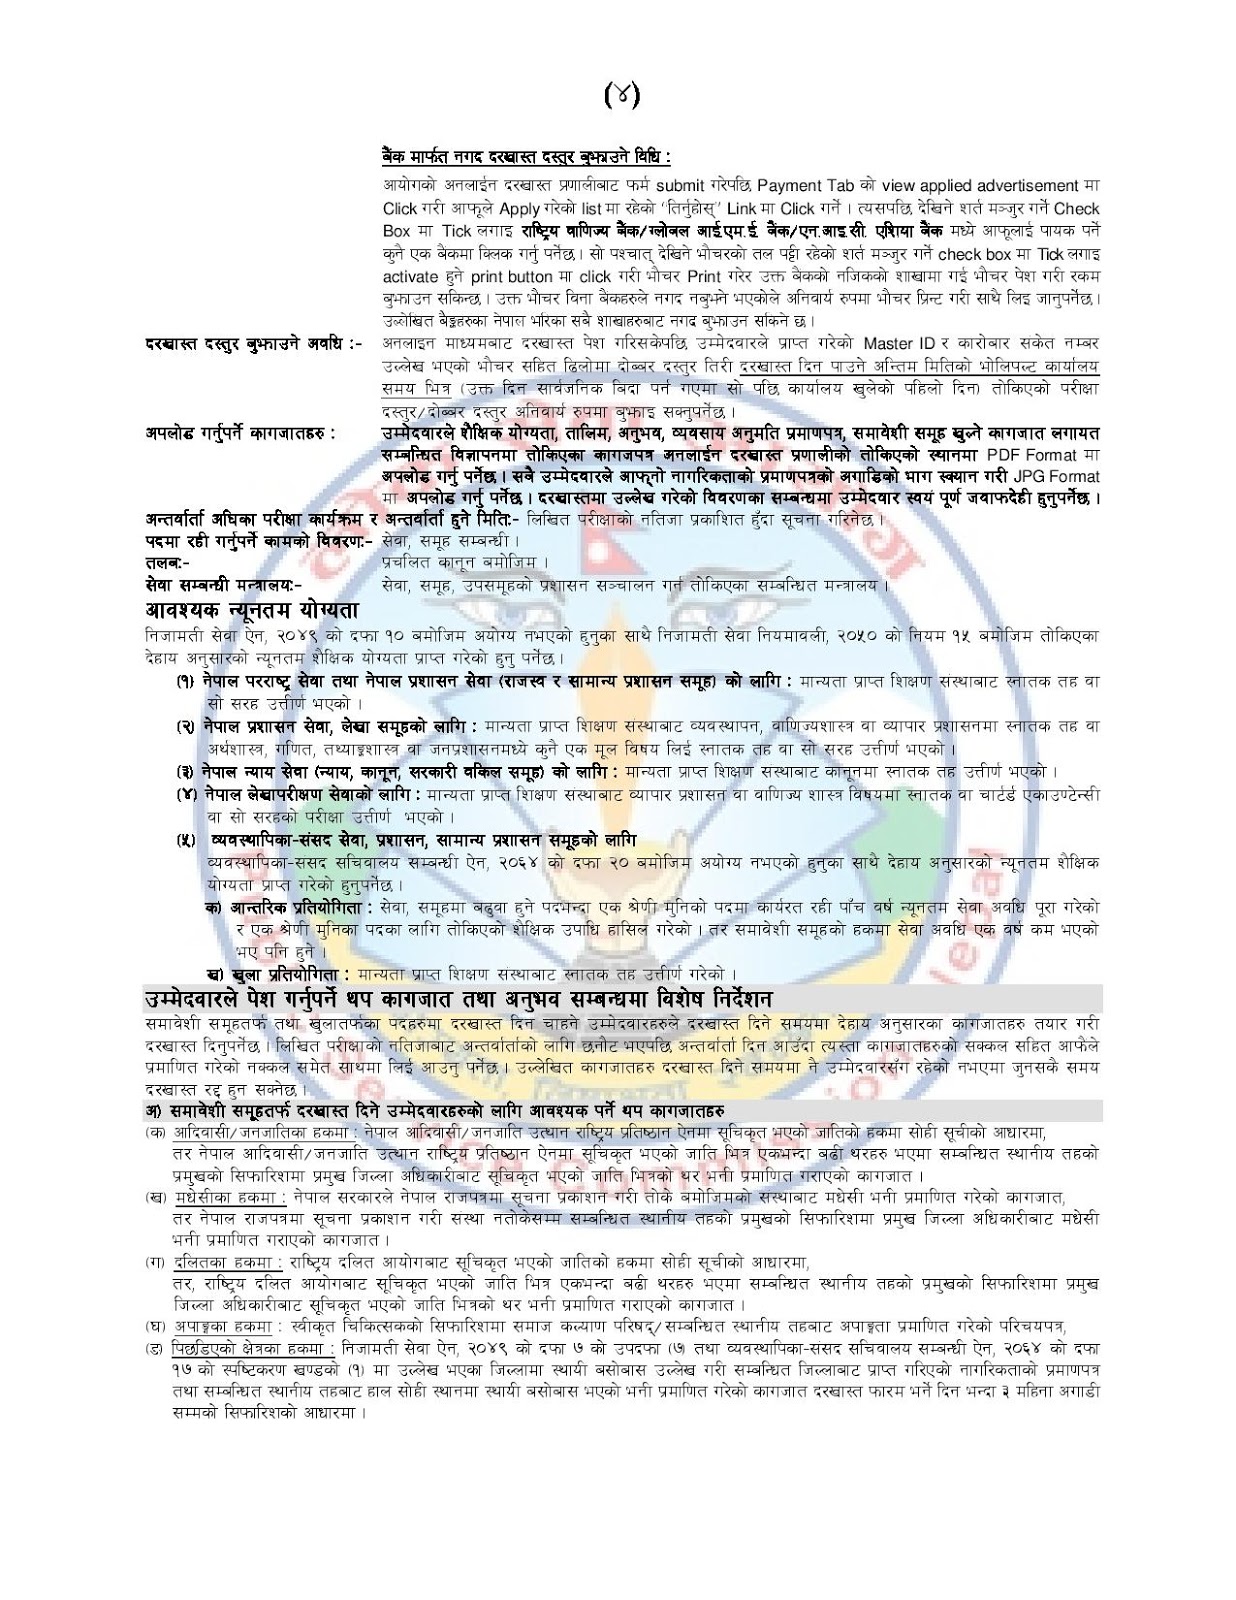 A Lot of Vacancies Announced for Section Officer - Gazetted Third Class 2076 - 2019